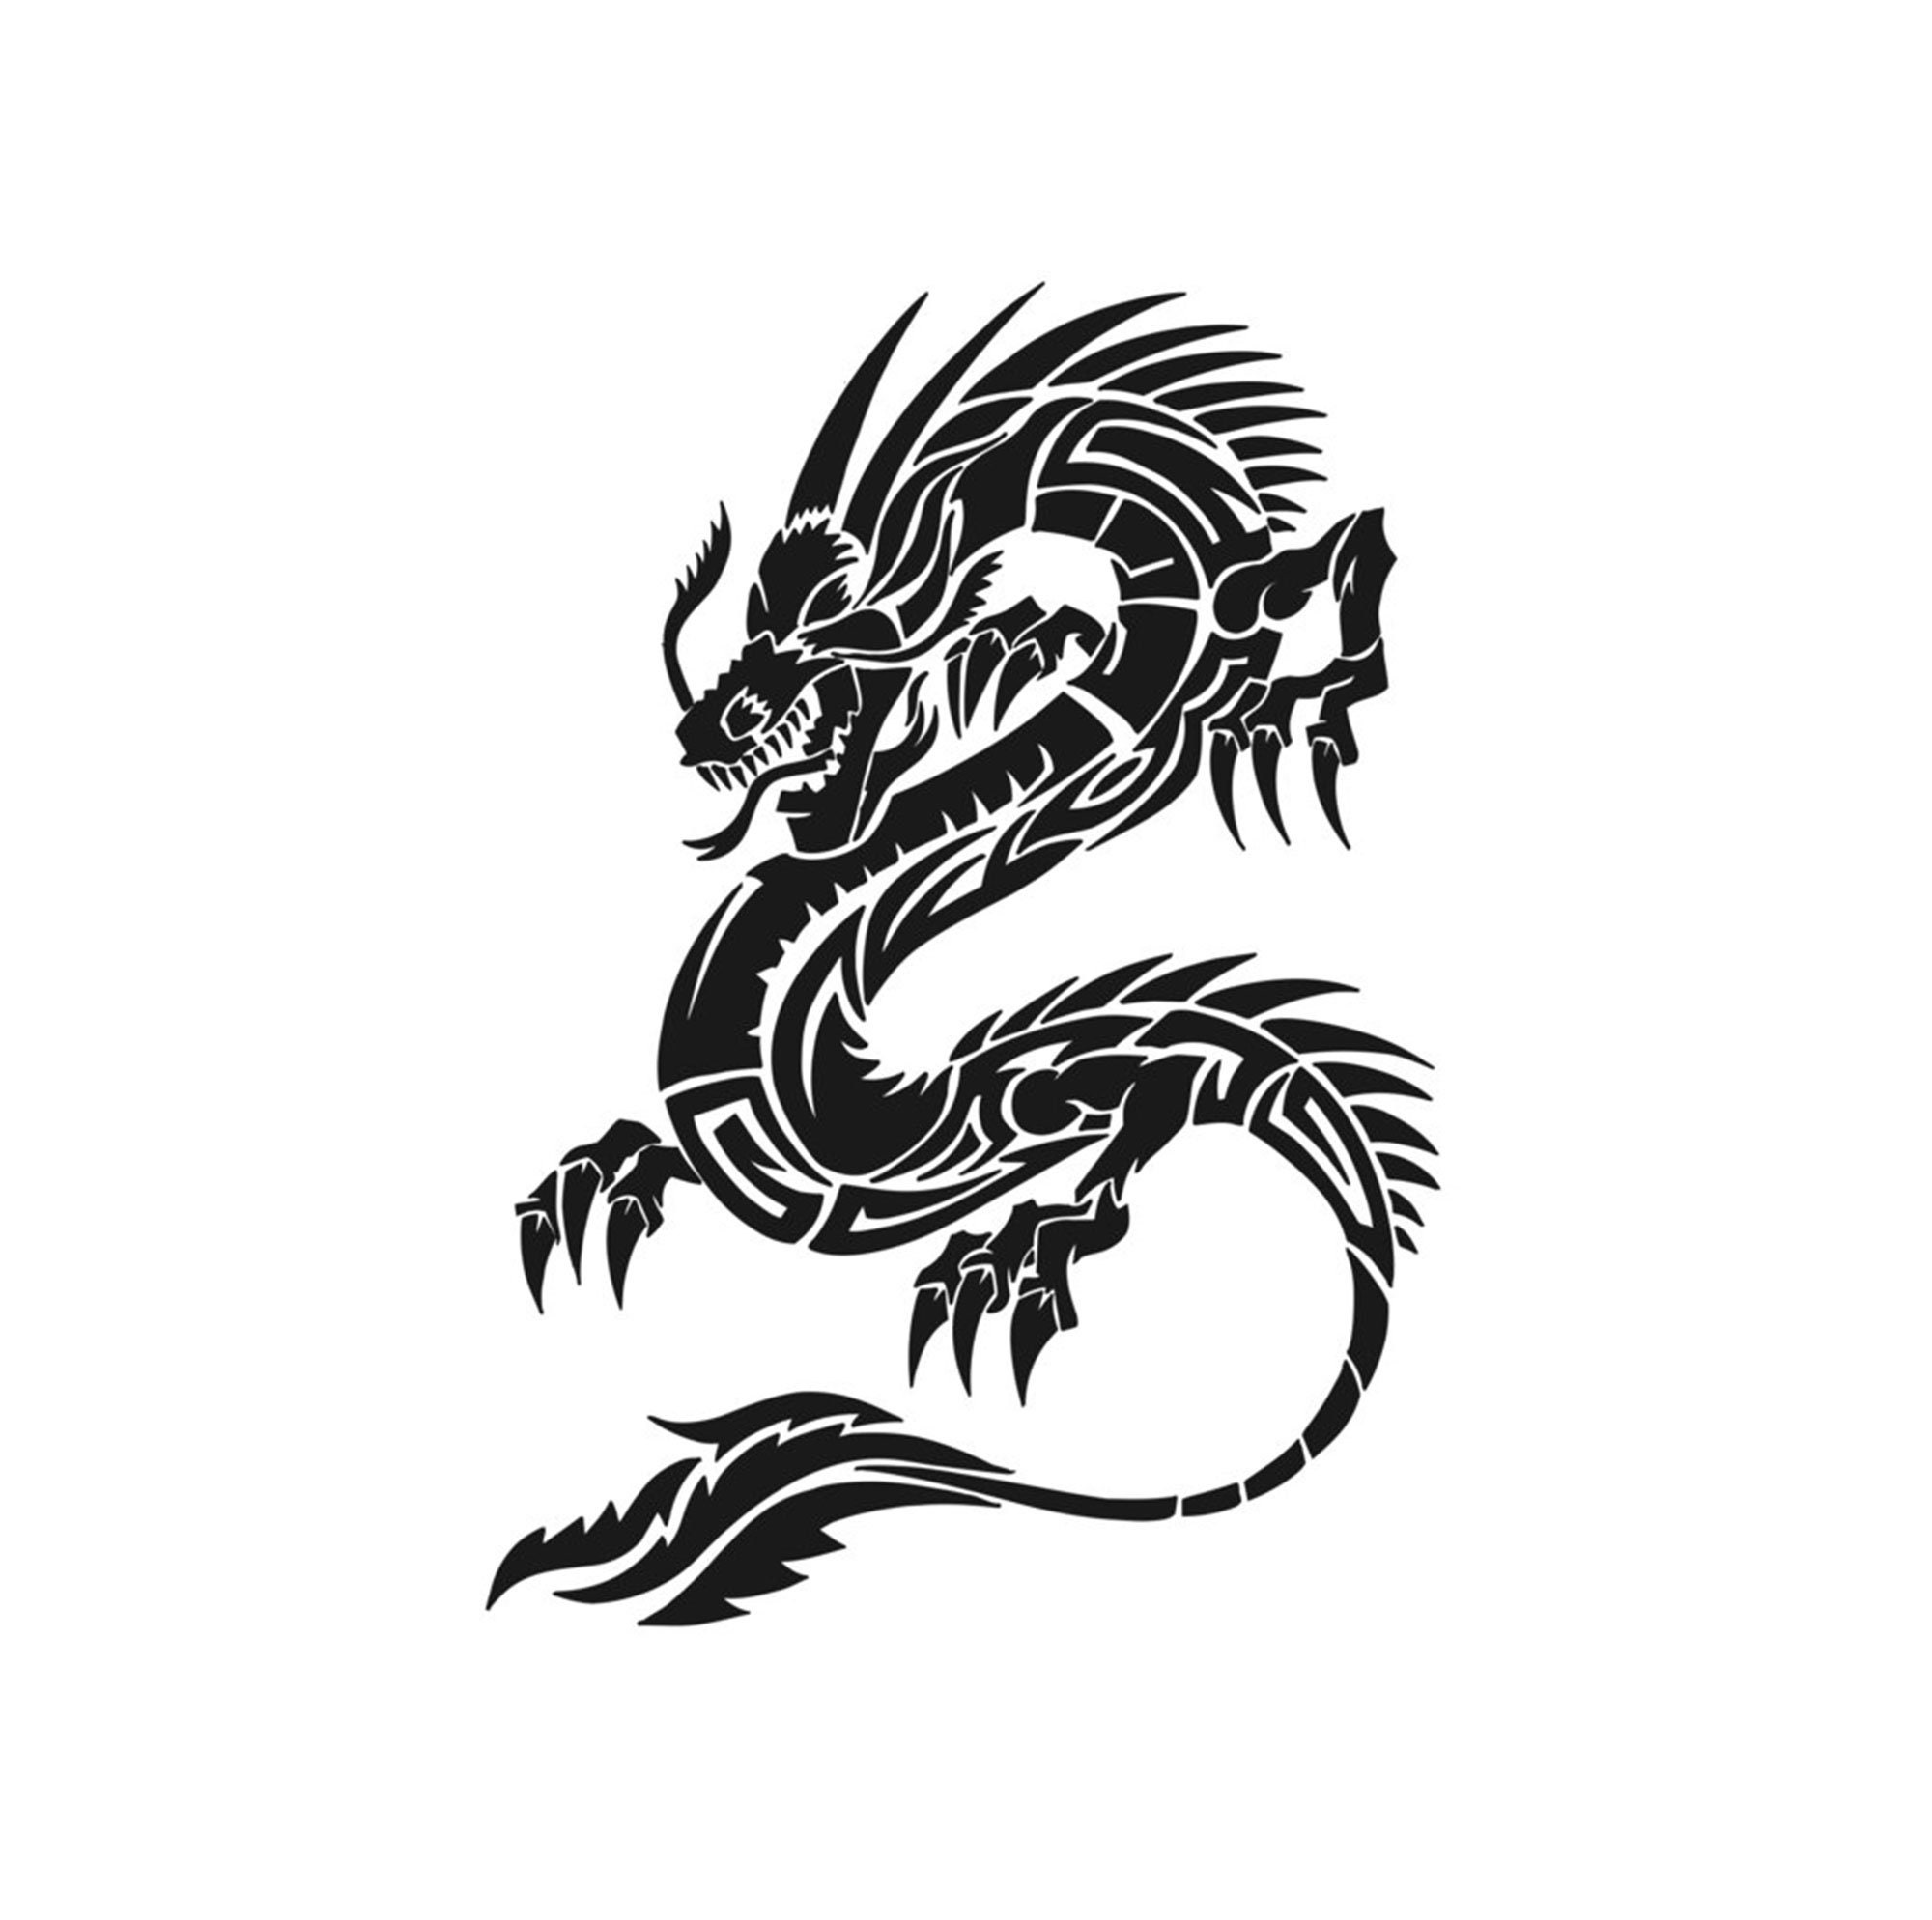 Chinese Japanese Dragon Stencil Sizes A5 A4 A3 And Larger Wall Etsy